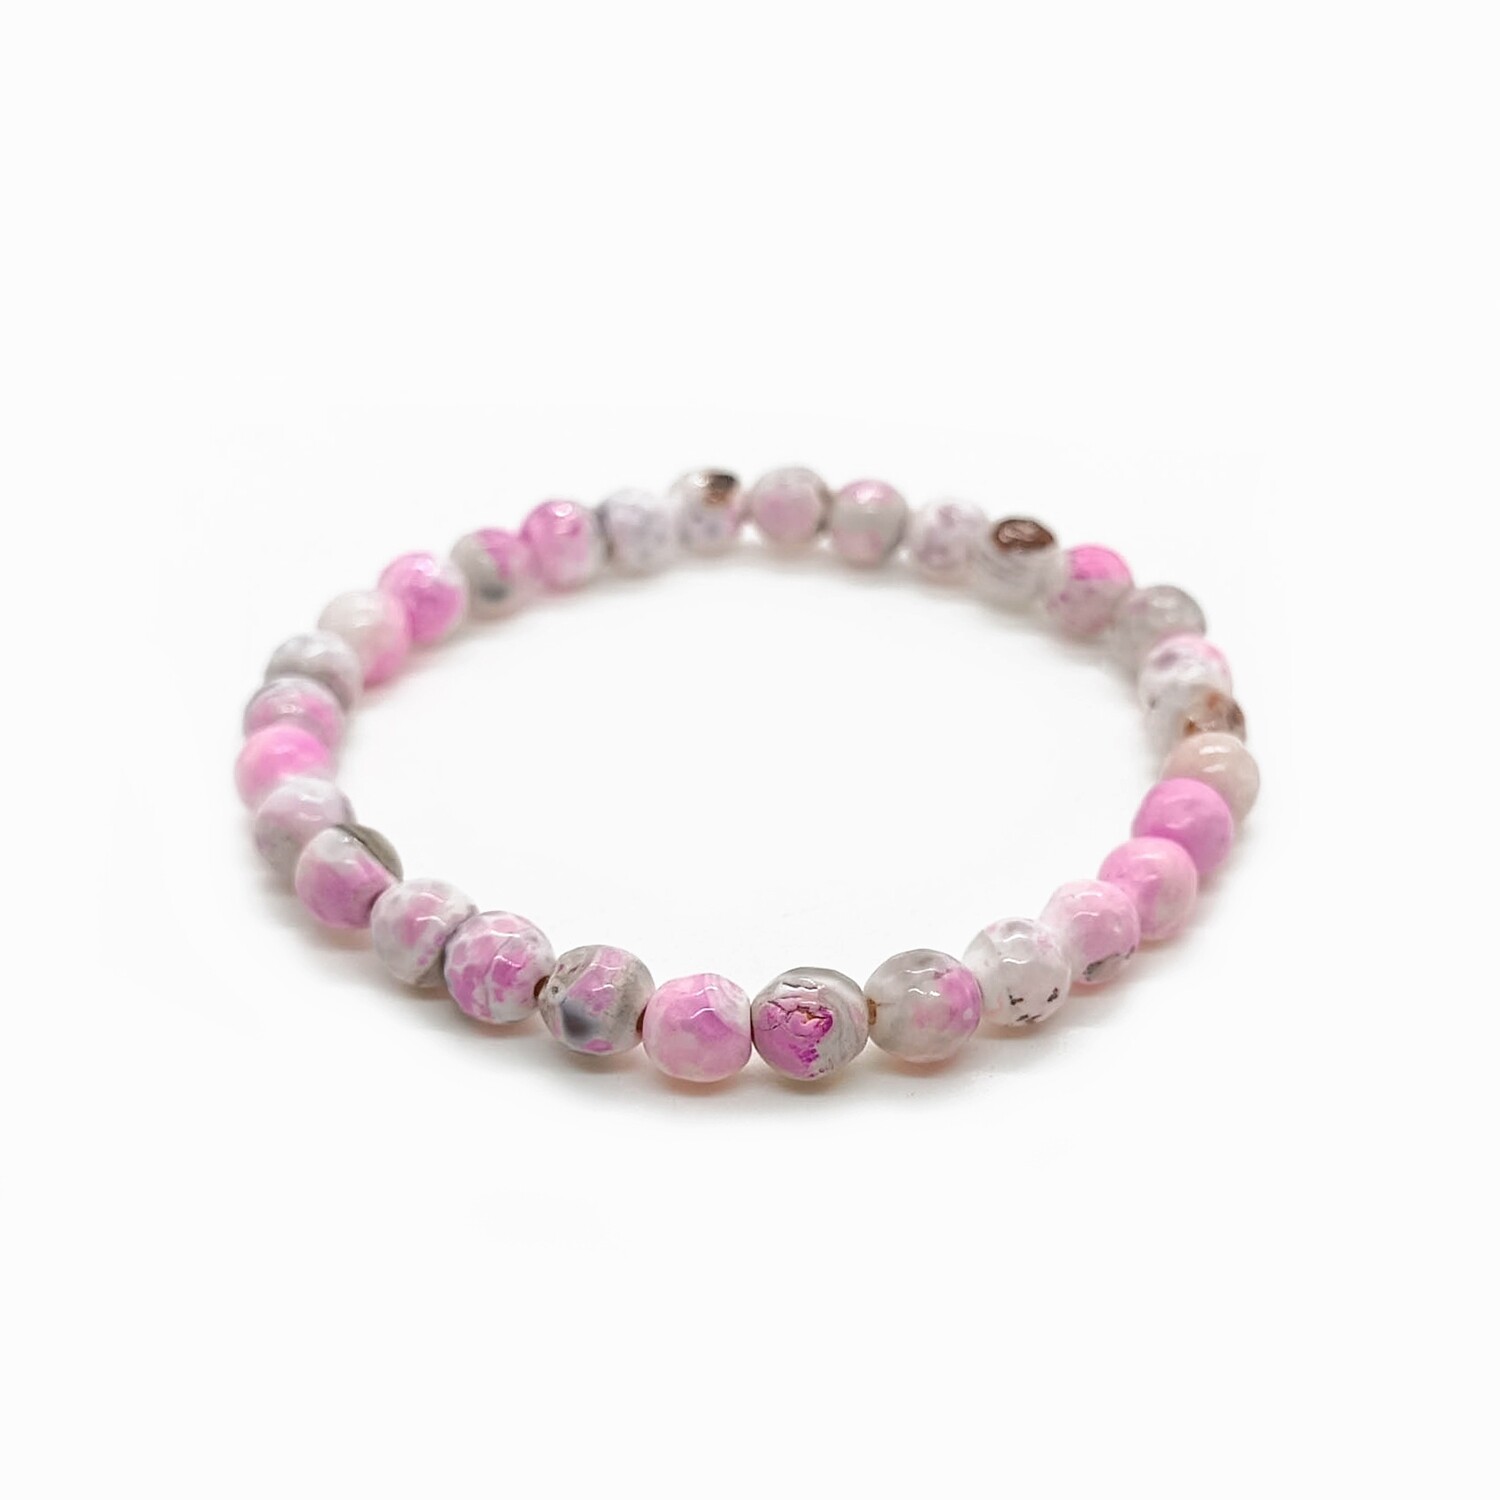 Pink and white agate gemstone bracelet (6mm)